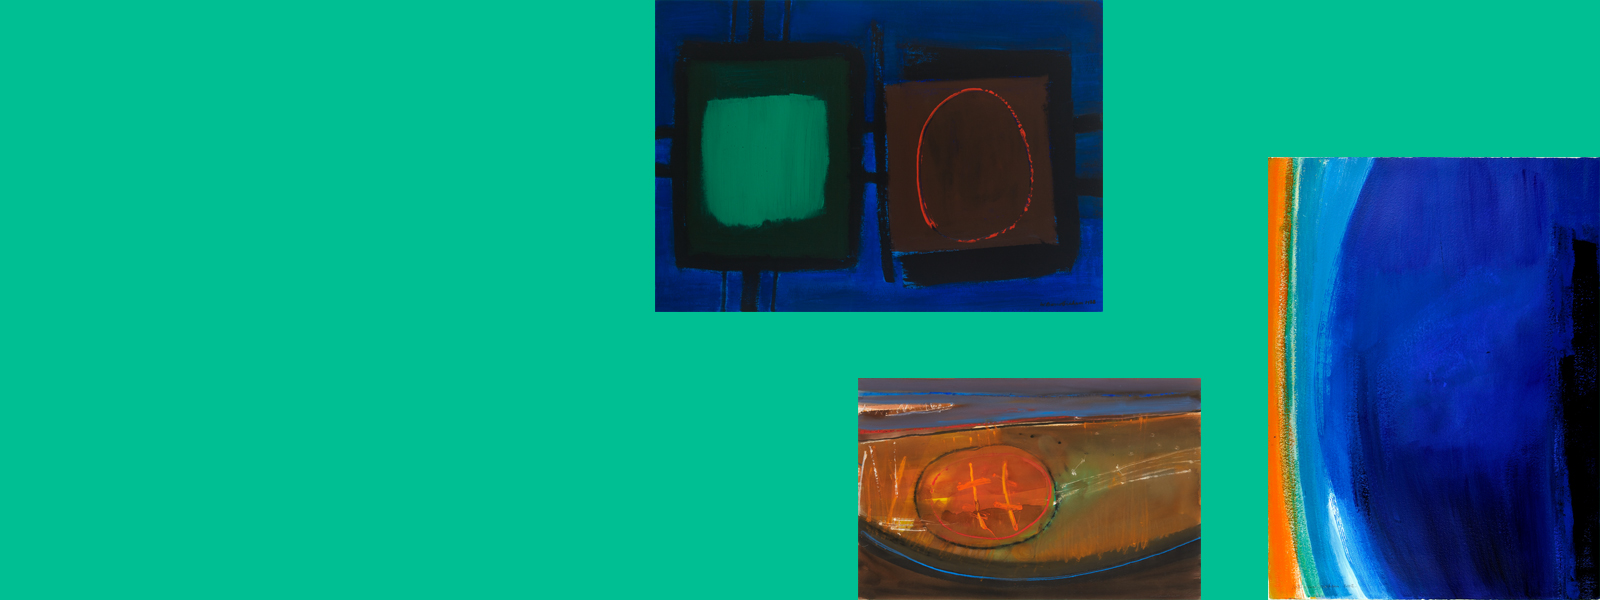 Three paintings grouped on an emerald background. From left to right: an acrylic painting of a green square and a brown square with black outlines and joined by two lines on a blue background; an acrylic painting of an orange circle on an orangey-brown and blue background; an acrylic painting in blues with a stripe of orange on the left hand edge